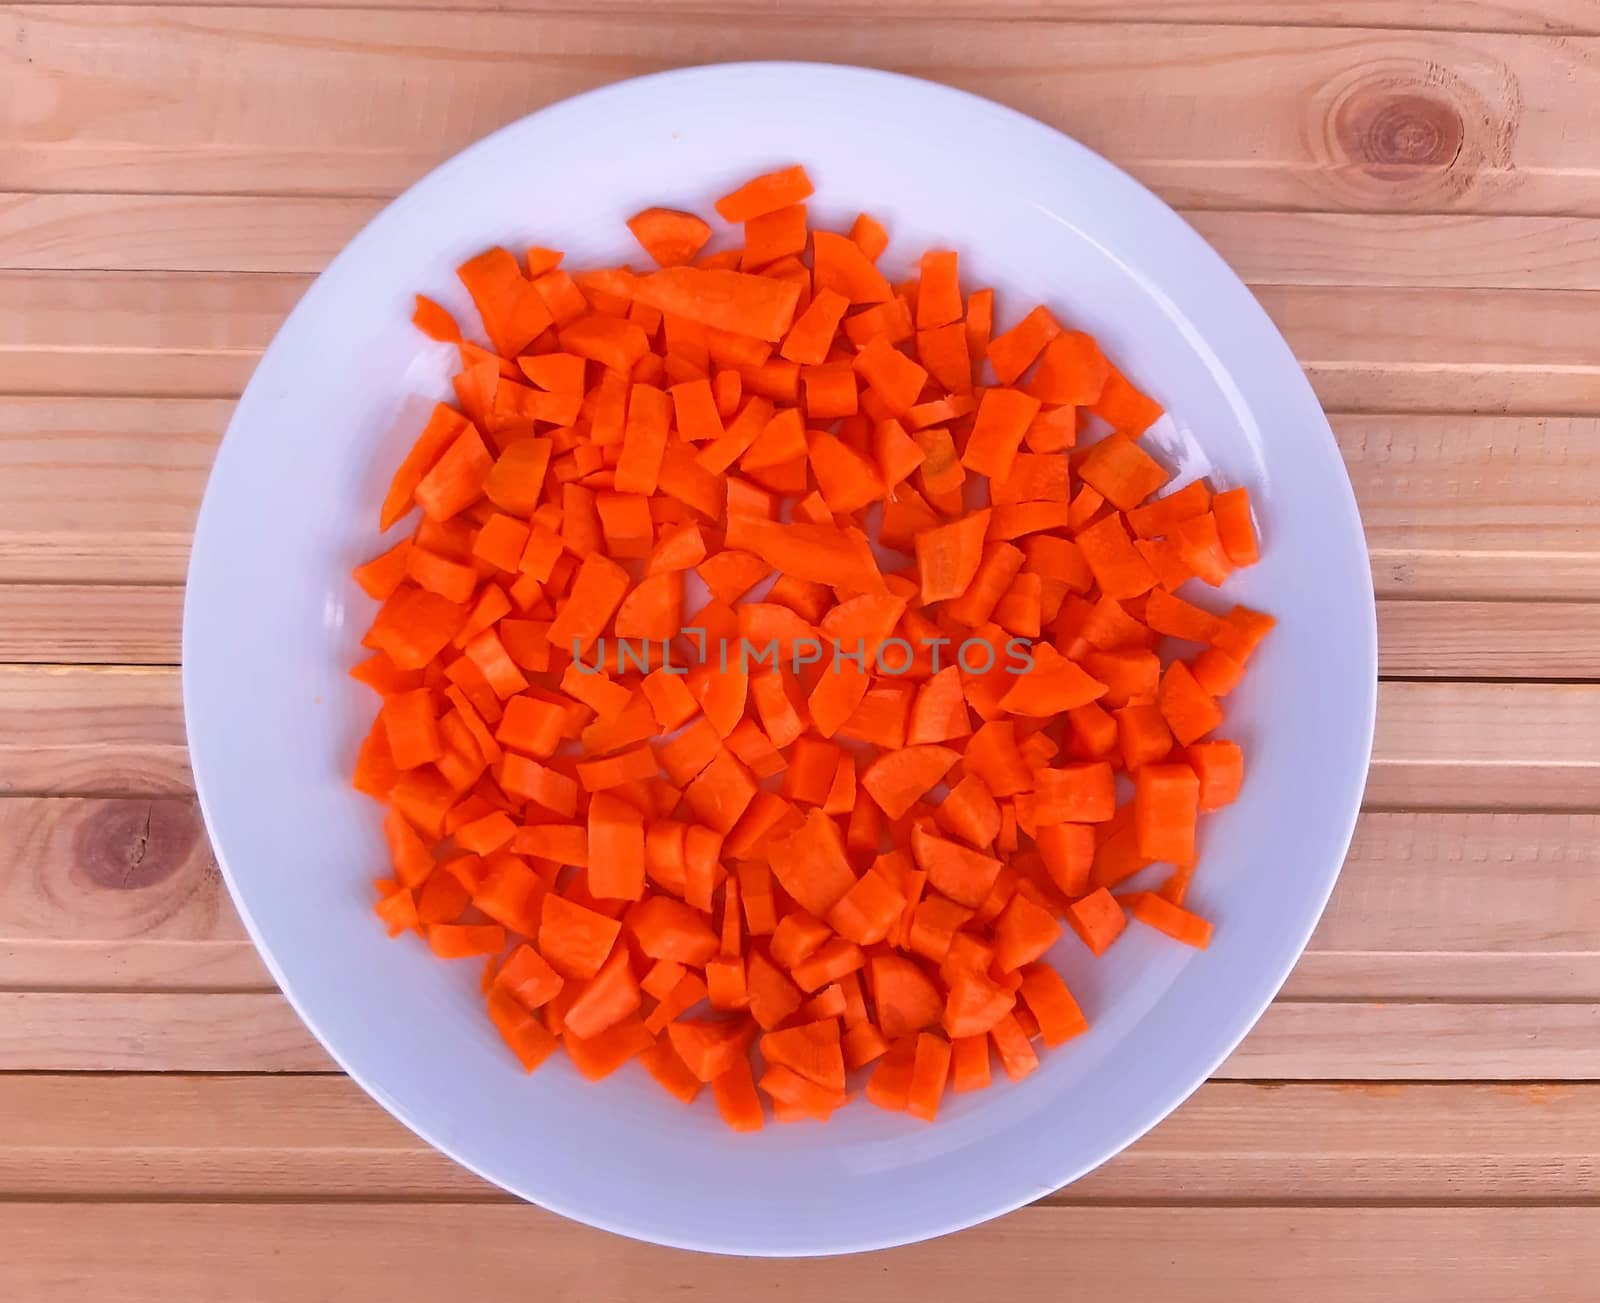 Carrot cut off into a plate on wooden background by Mindru